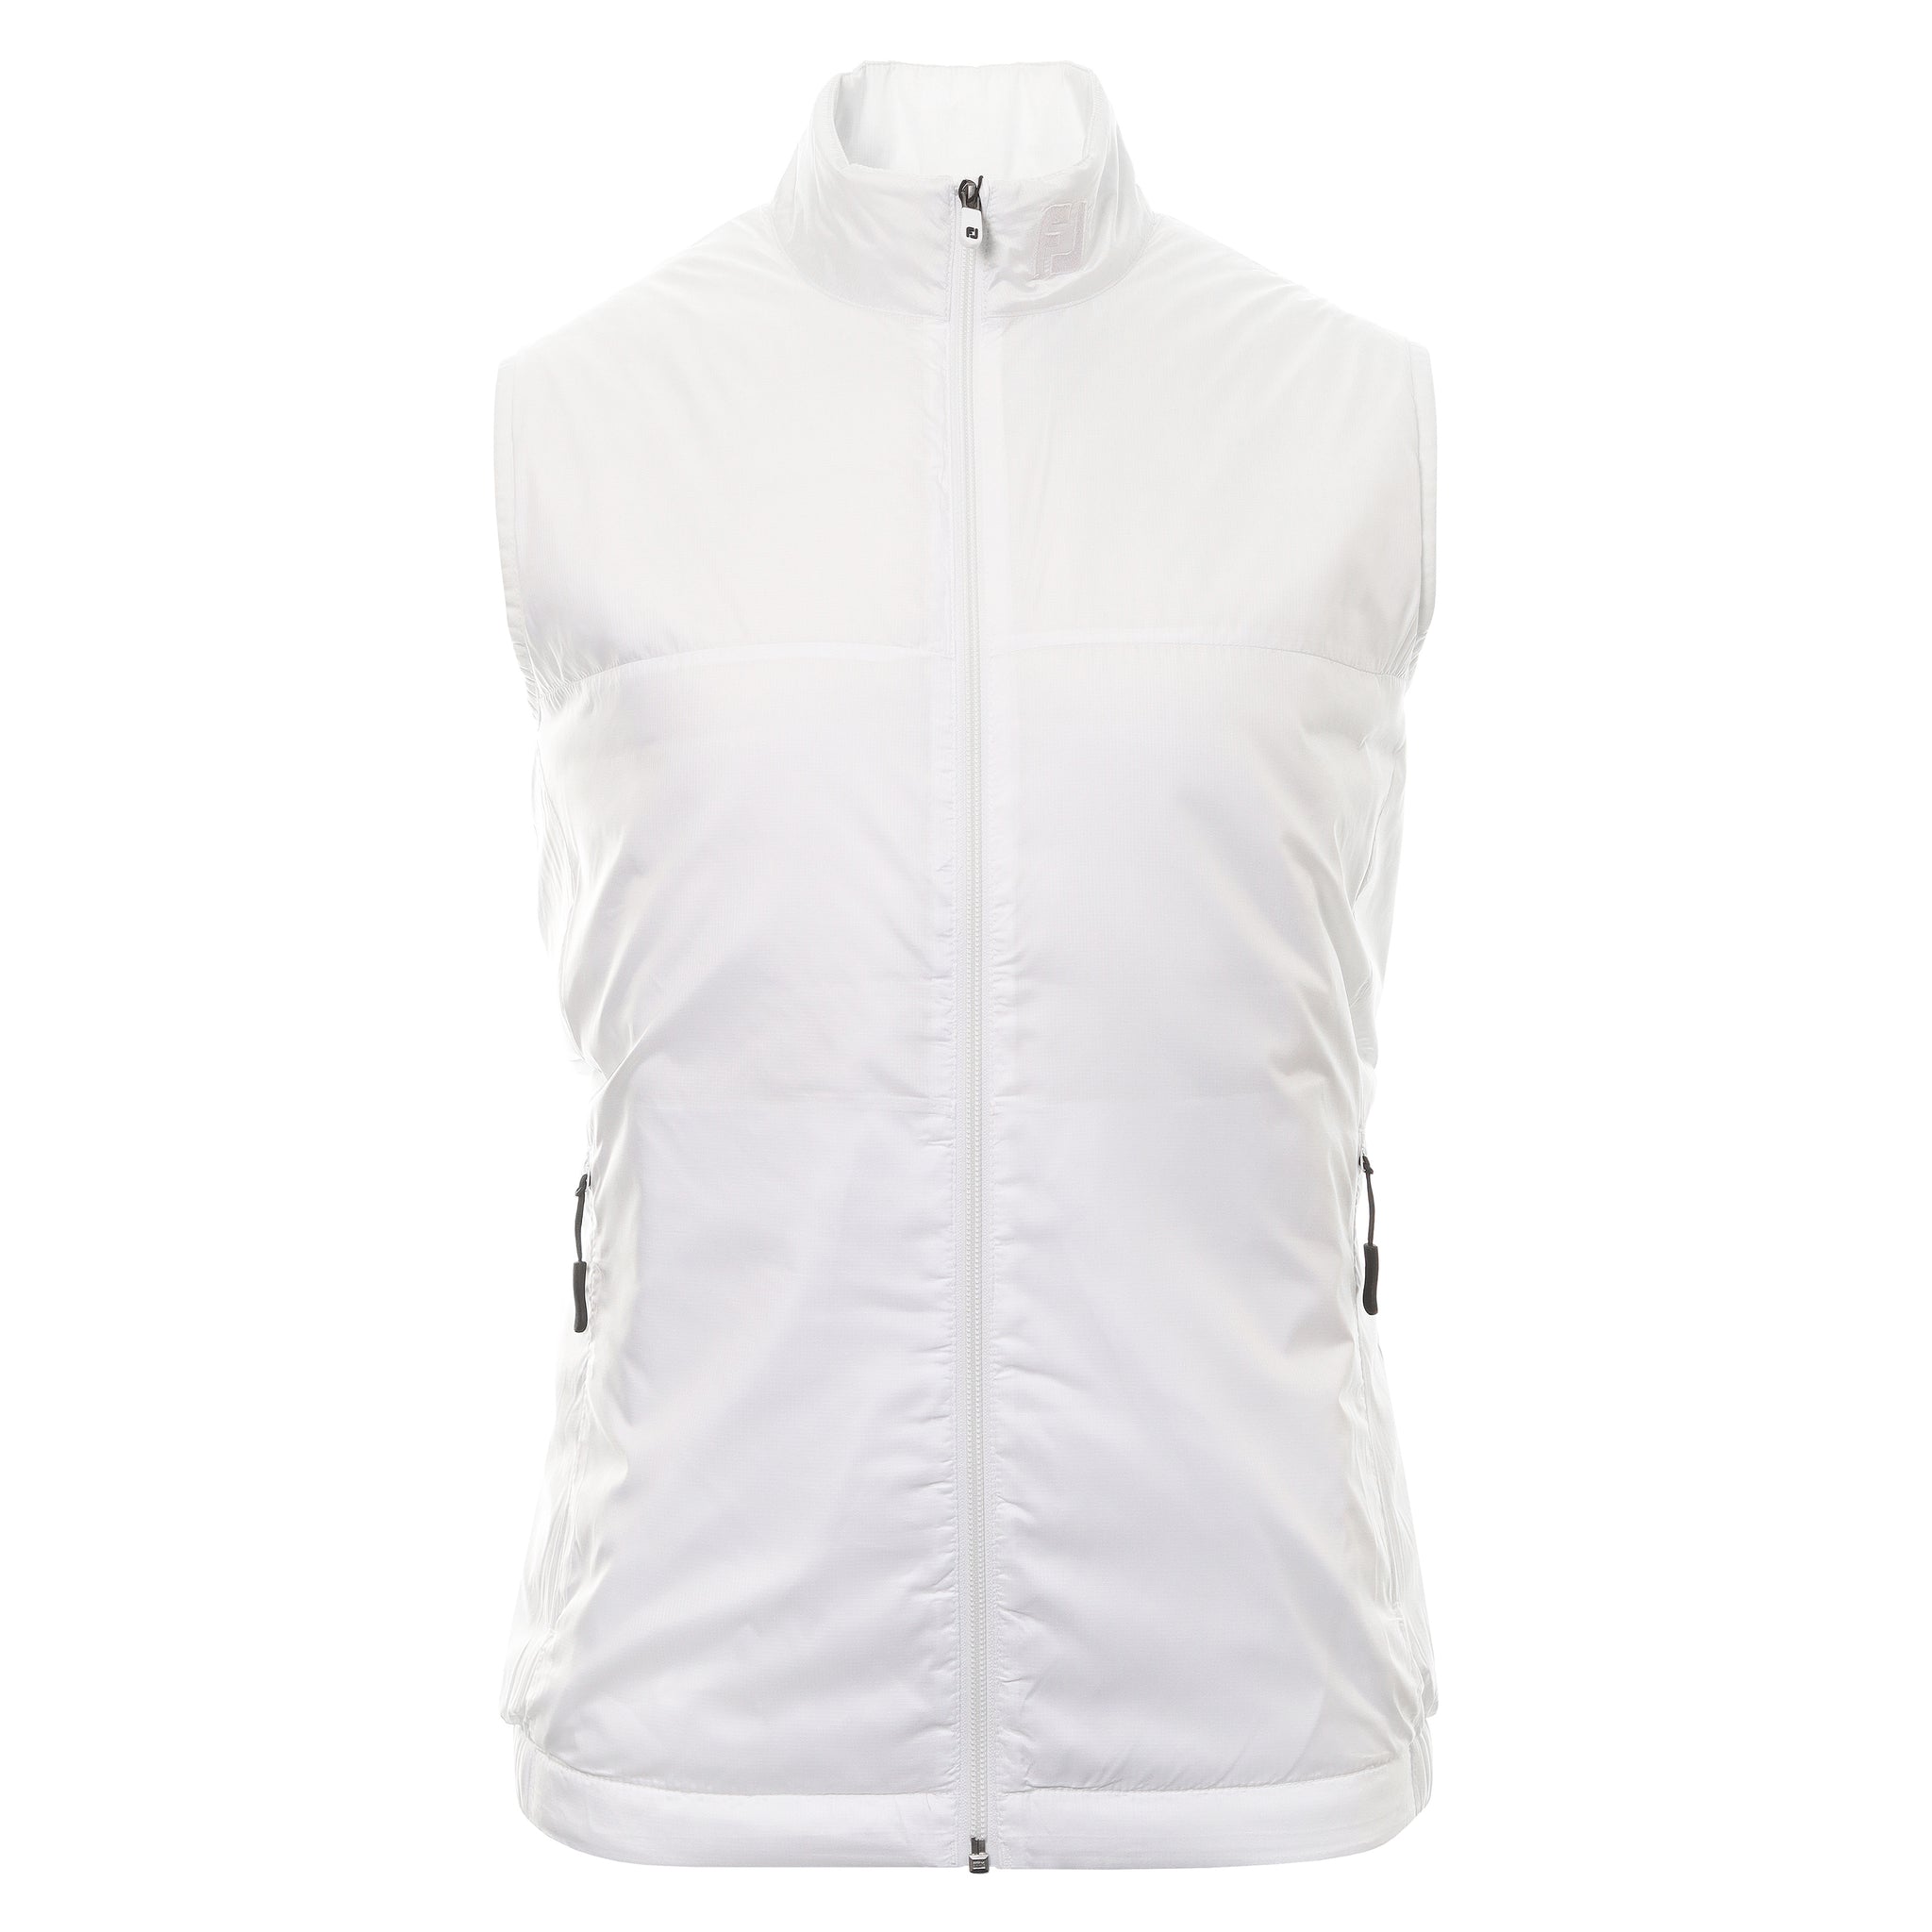 FootJoy Lightweight Thermal Insulated Vest